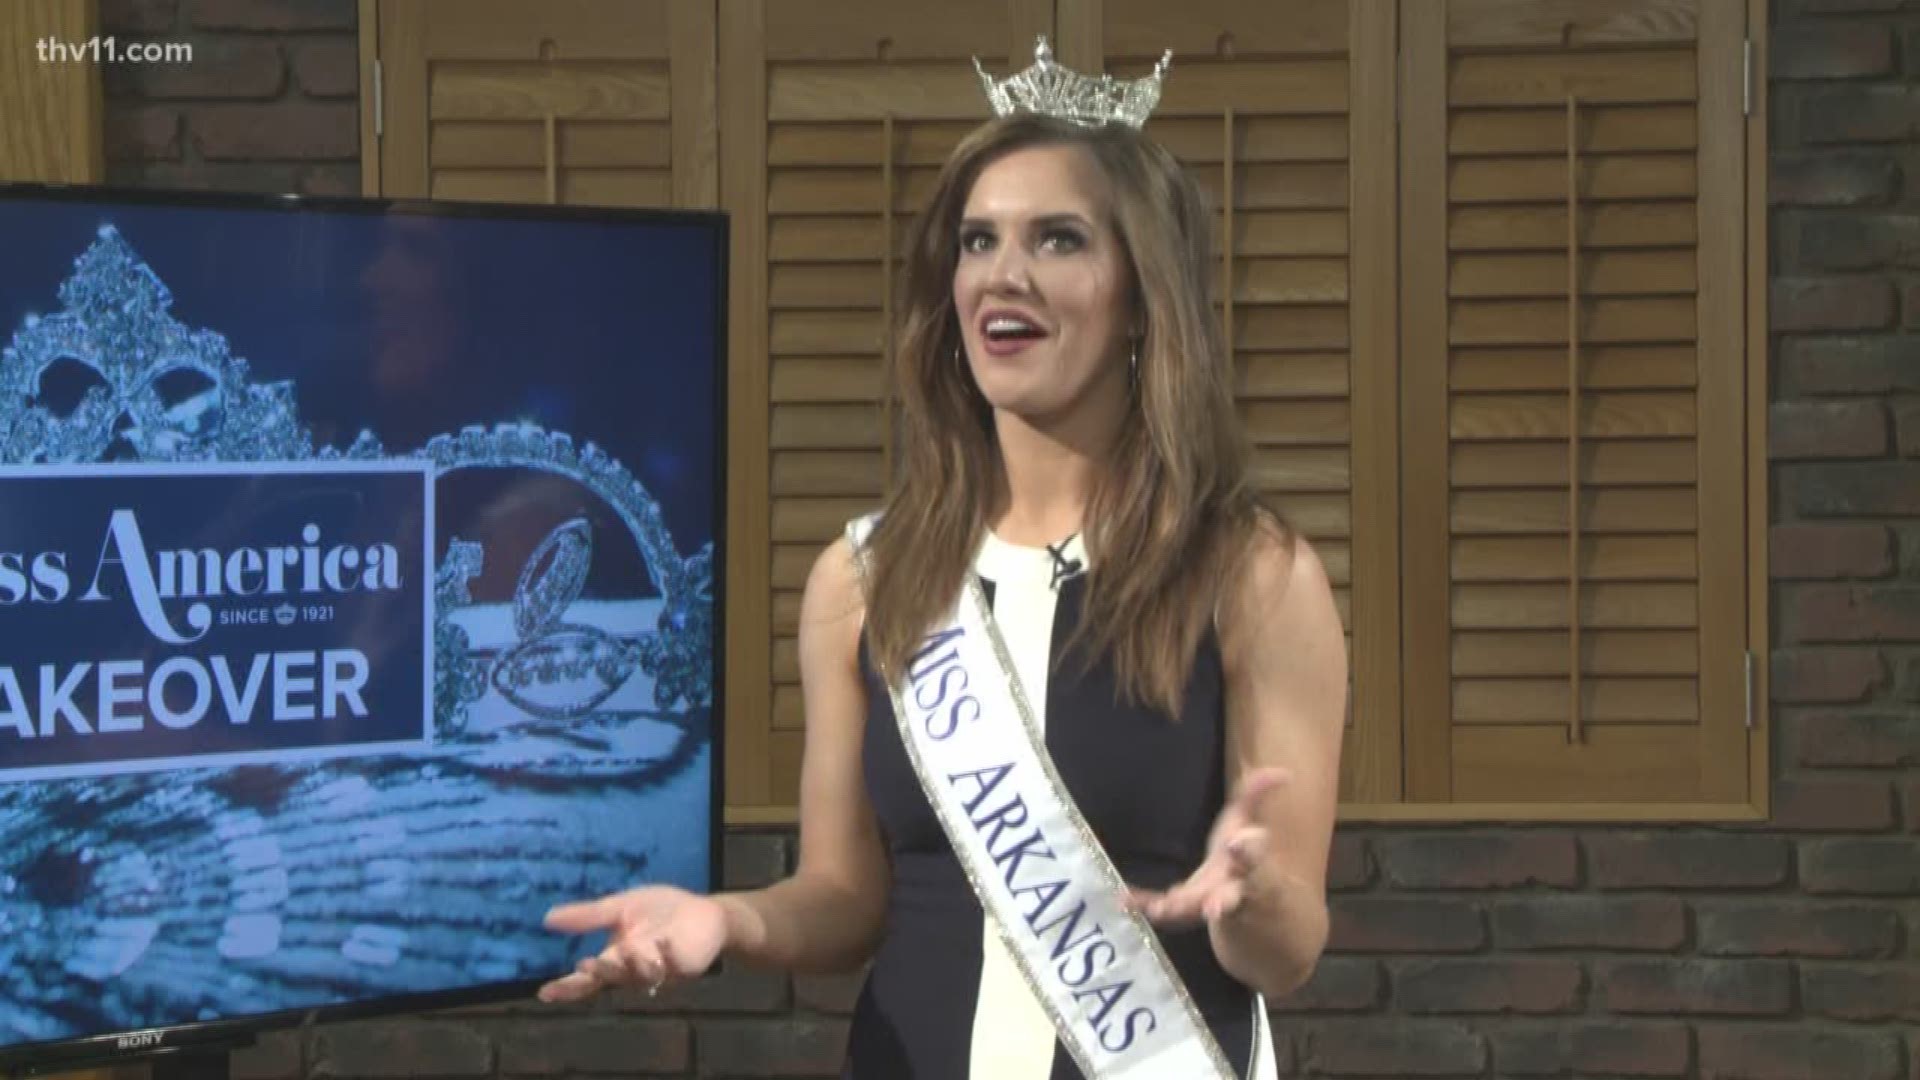 Maggie Benton, reigning Miss Arkansas, shares her thoughts with former Miss Kansas Amanda Jaeger about Miss America's decision to drop swimsuit competition.